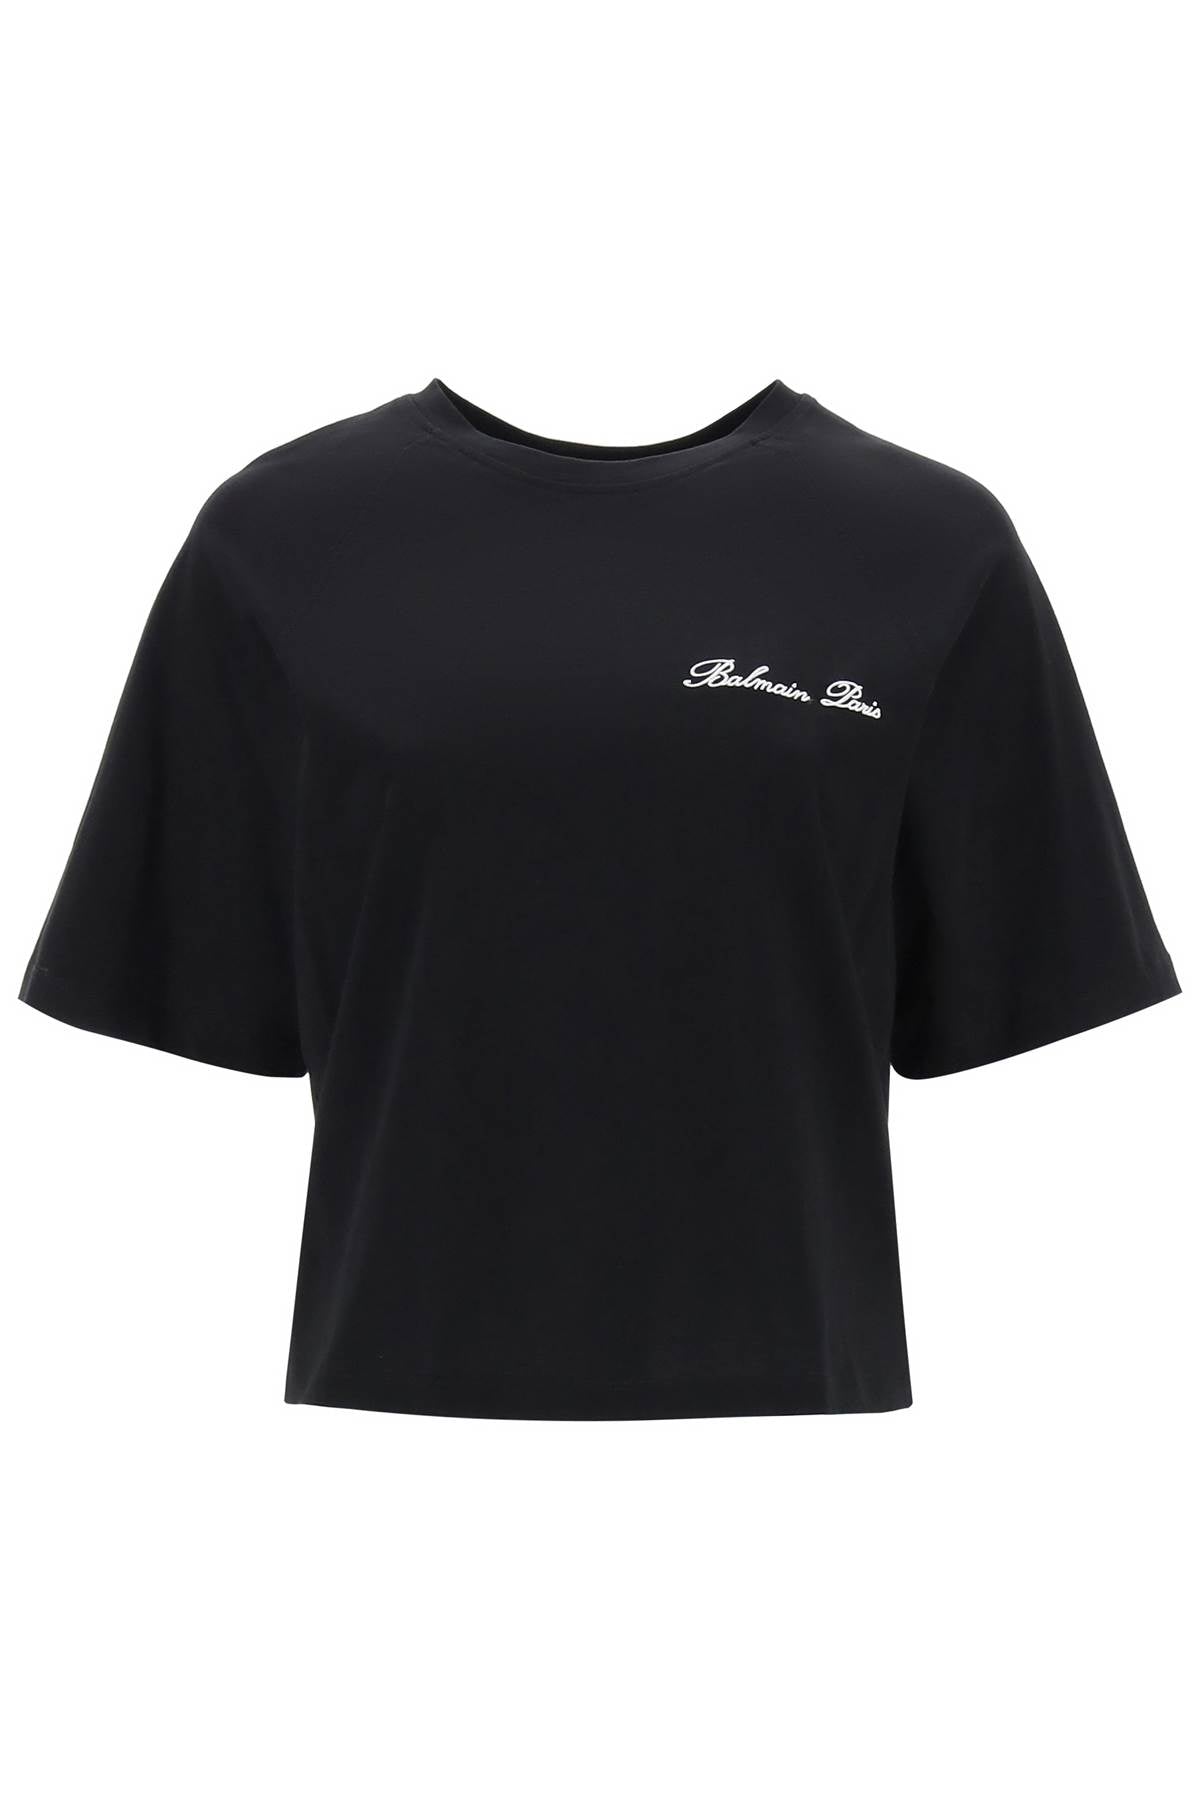 Balmain Cropped T-Shirt With Logo Embroidery Black